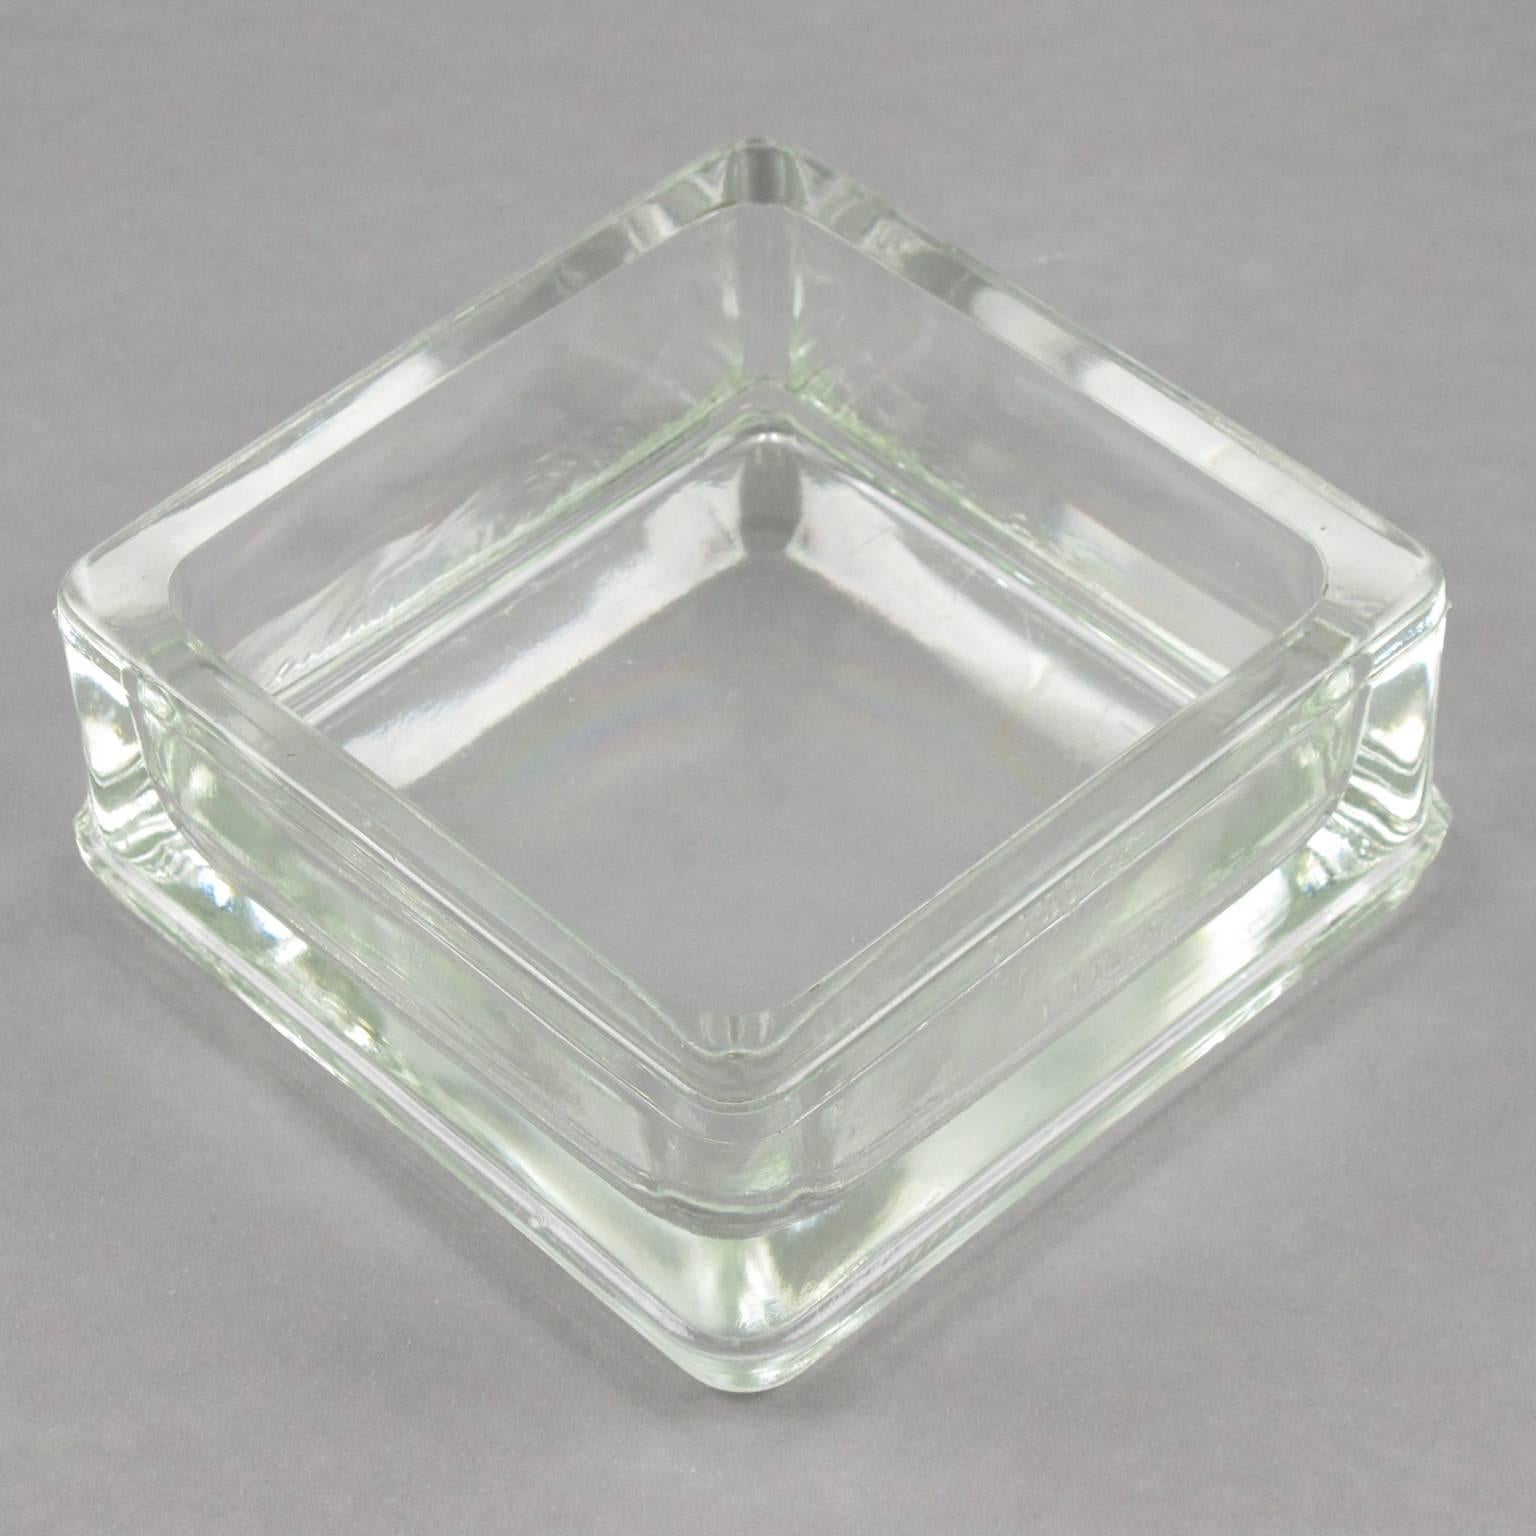 Mid-20th Century Designed by Le Corbusier for Lumax Molded Glass Desk Accessory Ashtray Catchall